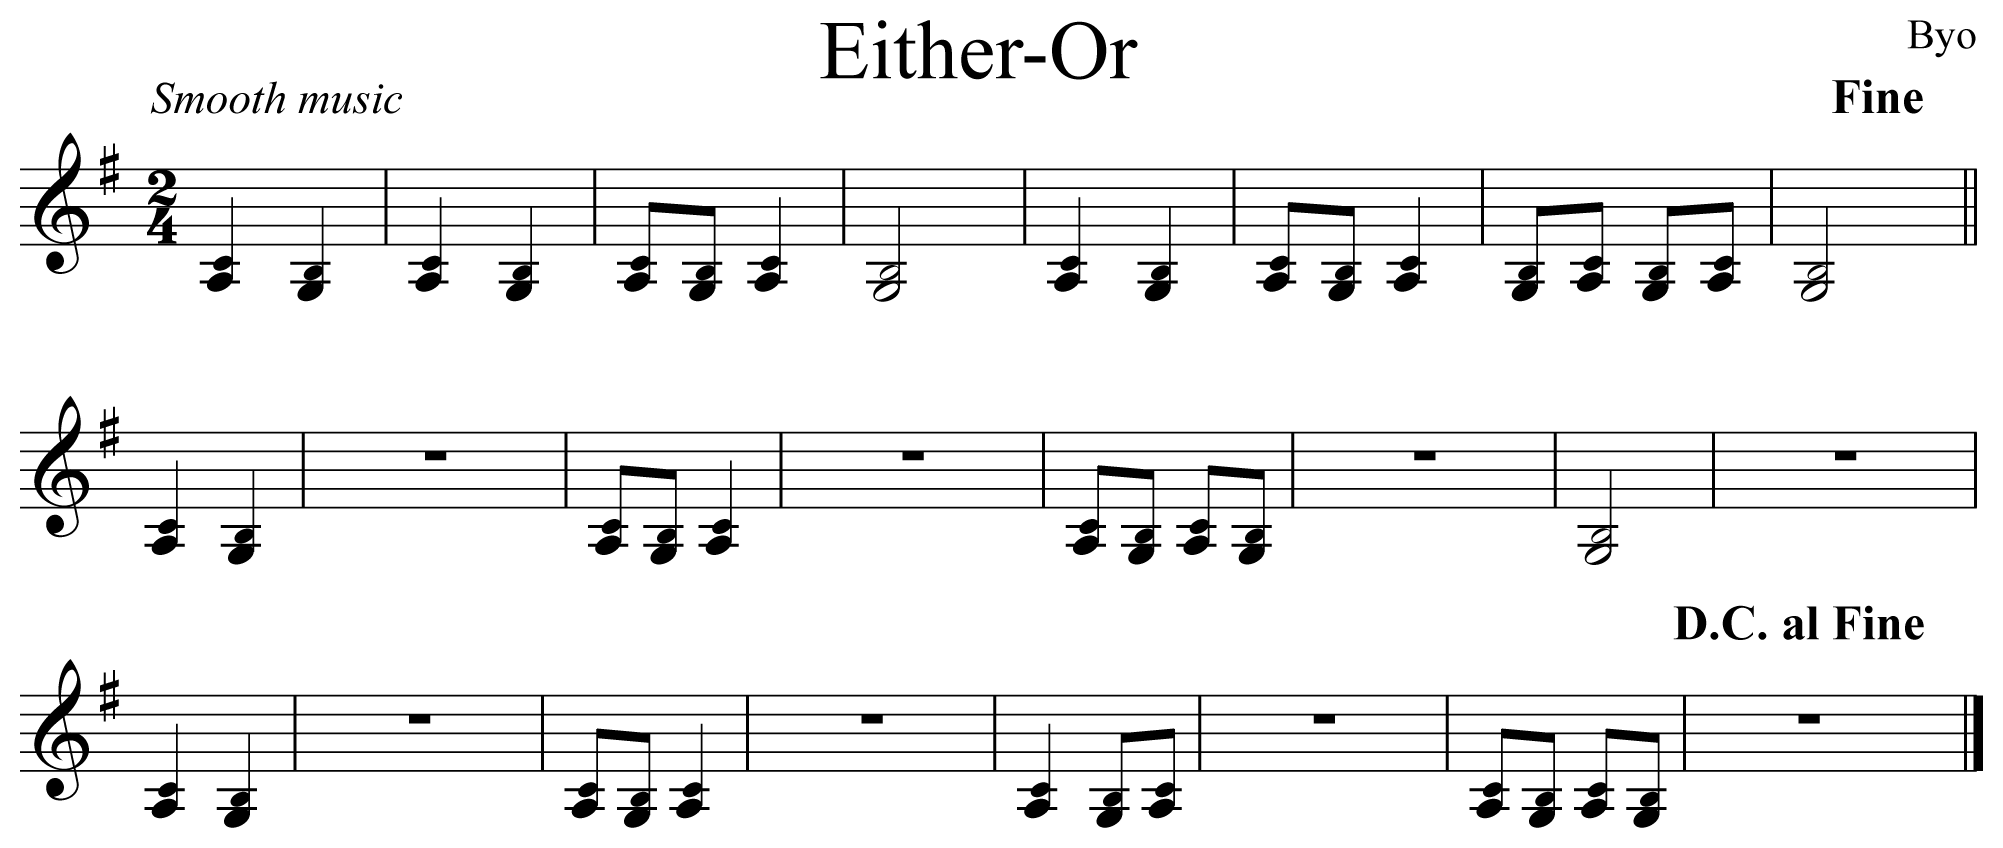 Either Or Music Notation Clarinet